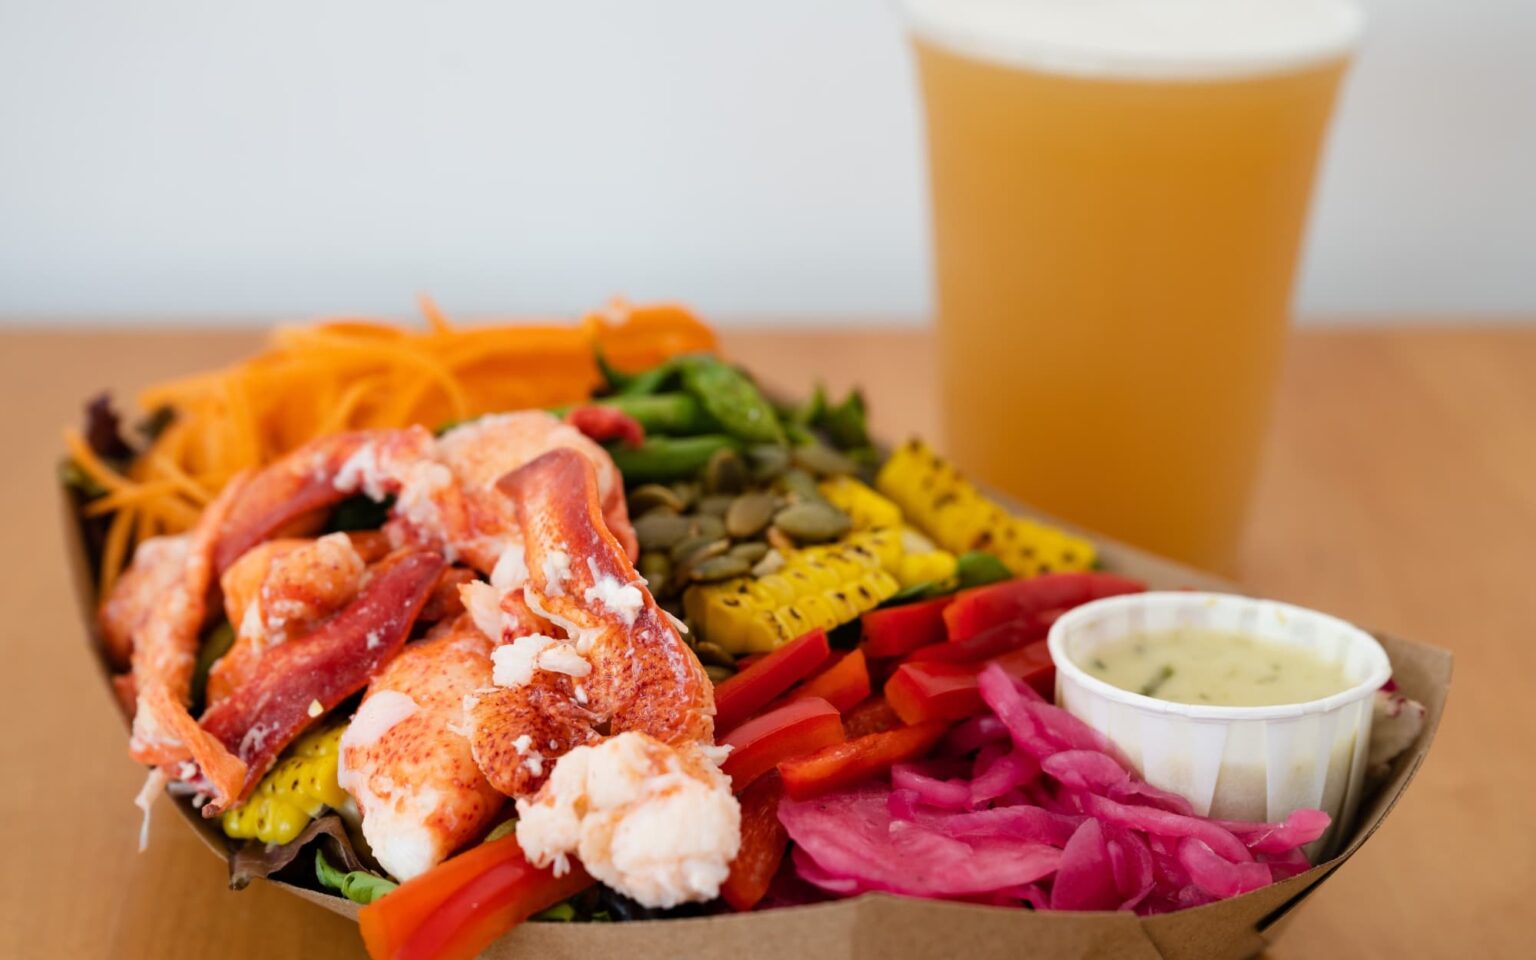 The Buoy Shack salad shown topped with a healthy portion of Maine lobster.